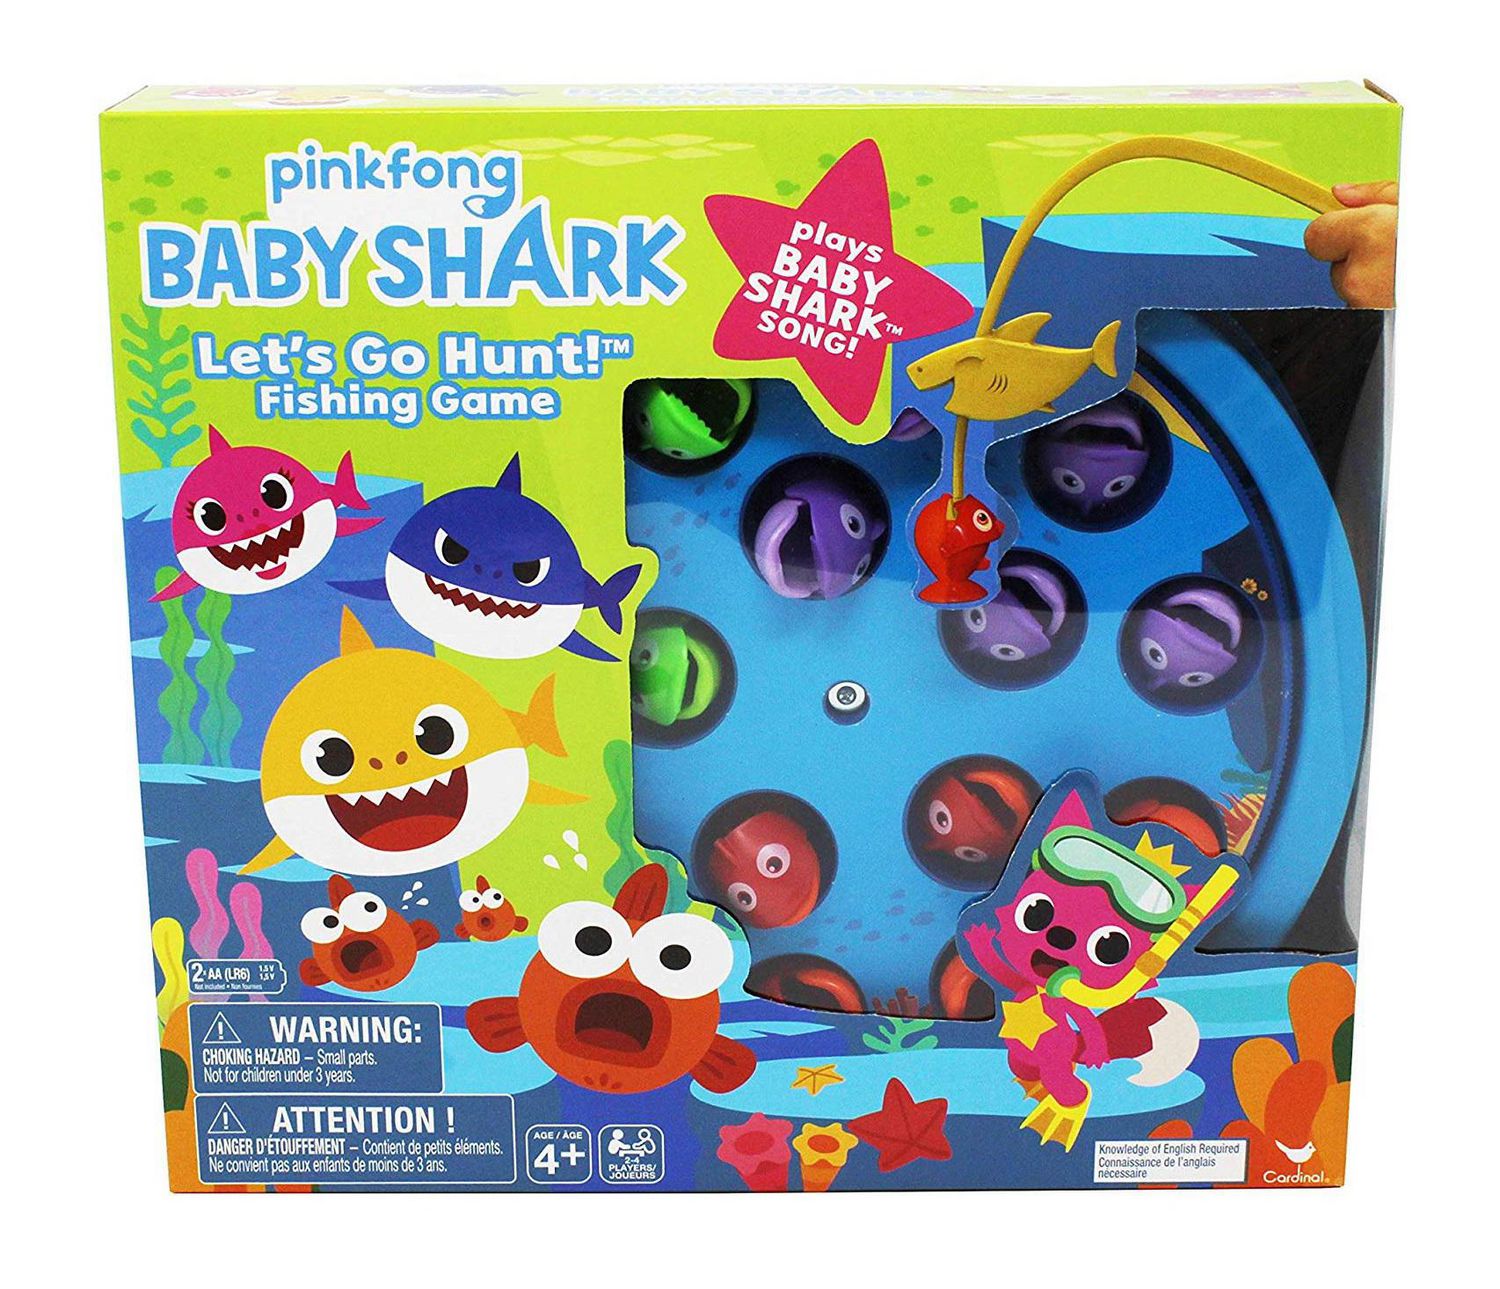 Pinkfong Baby Shark Let's Go Hunt Fishing Game - Plays the Baby